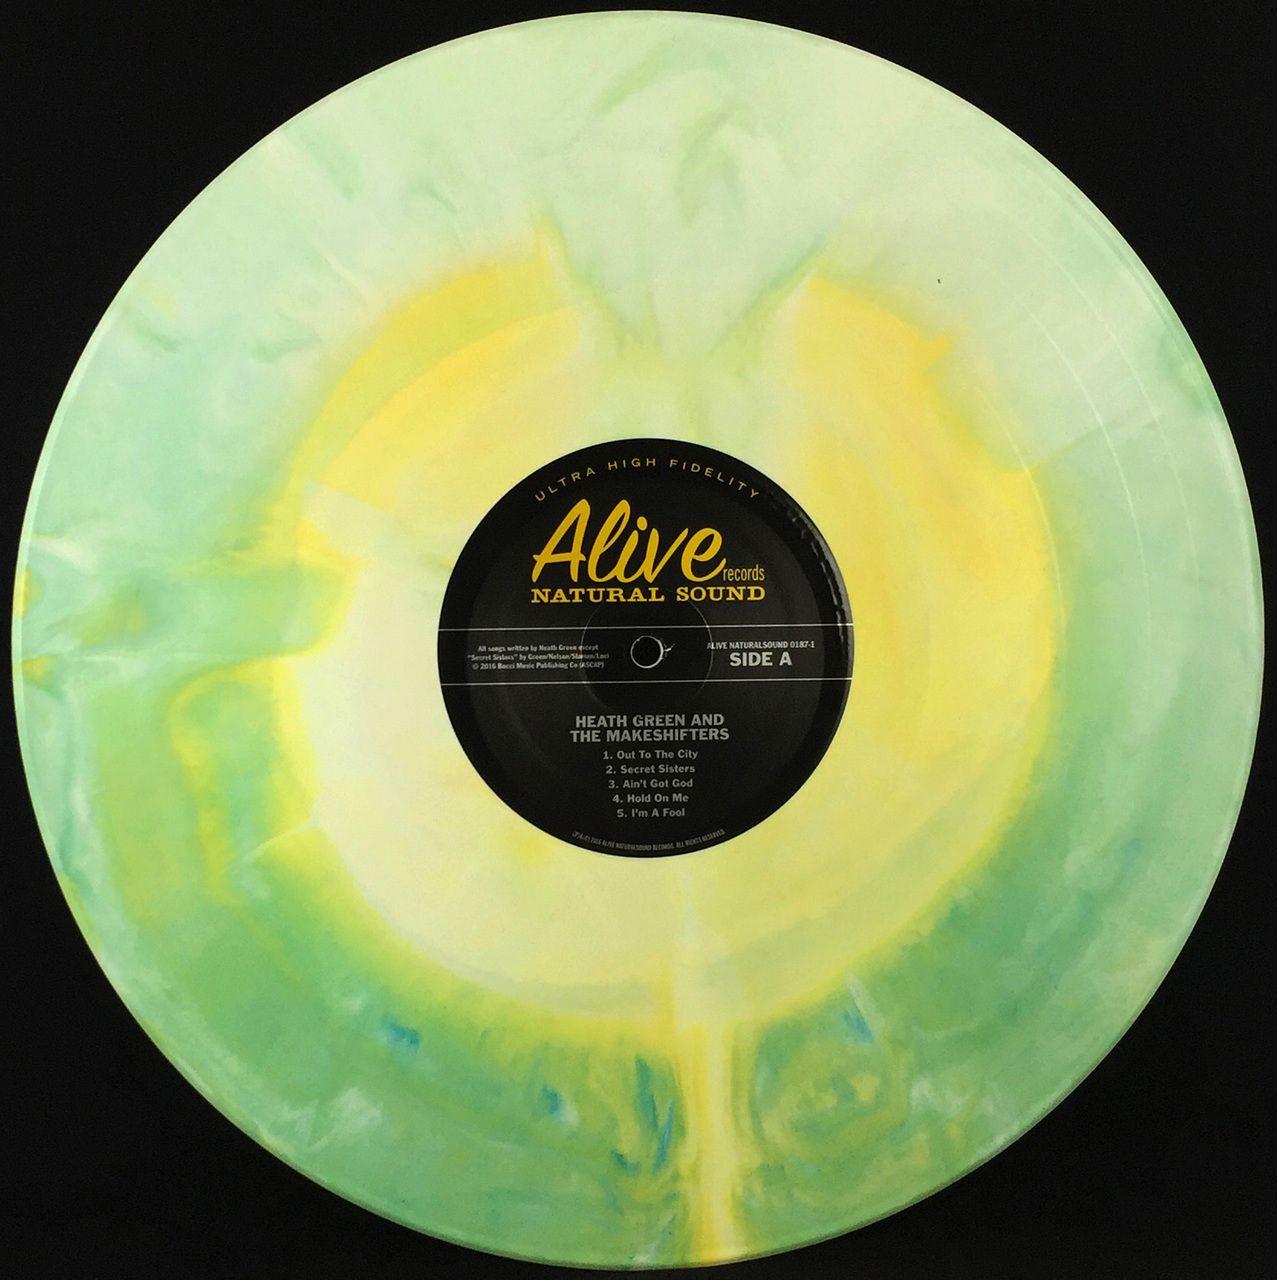 Green and Yellow Starburst Logo - HEATH GREEN AND THE MAKESHIFTERS -ST -STARBURST VINYL LP - Bomp Records